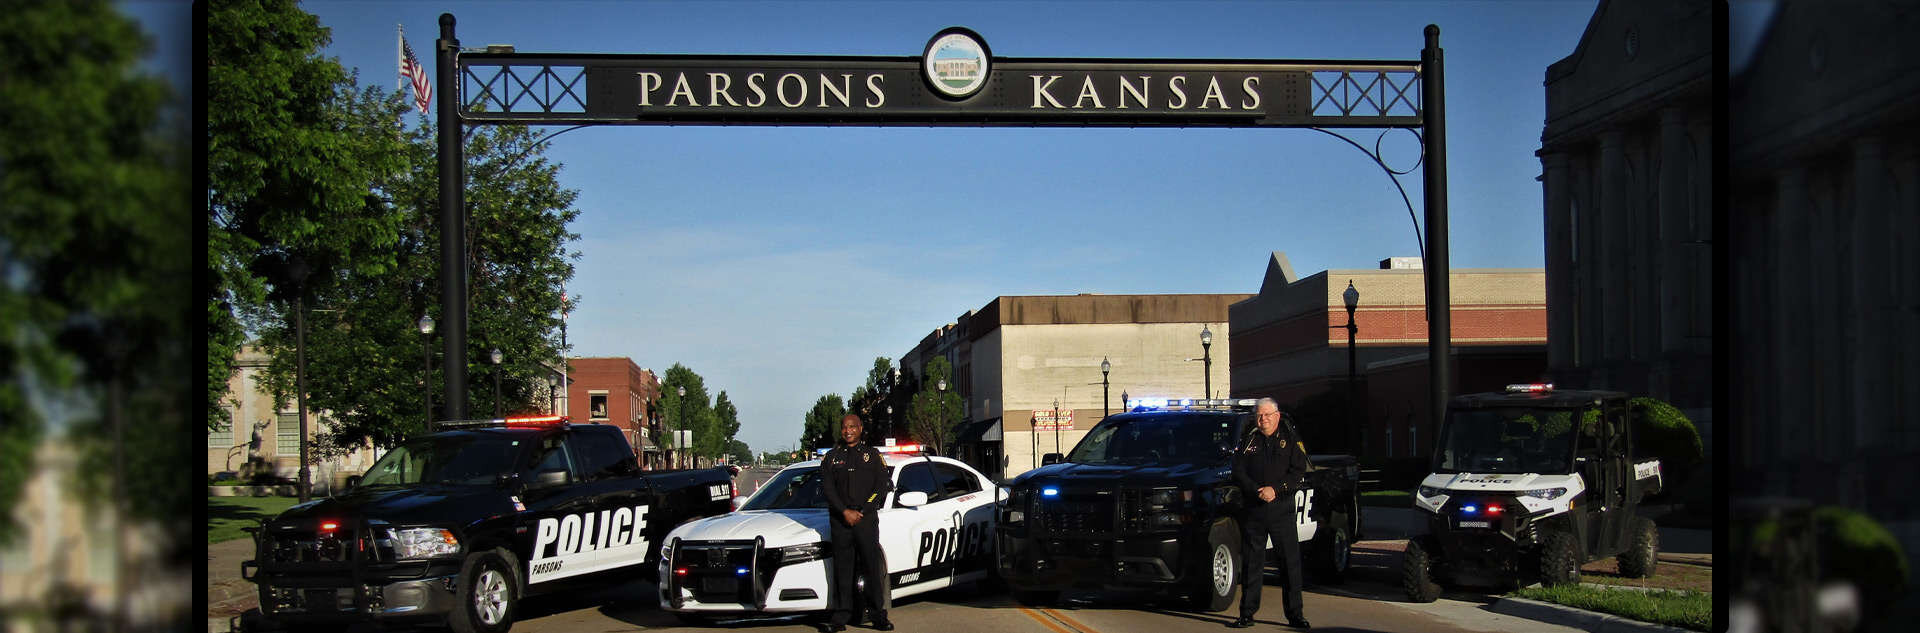 Welcome to Parsons Kansas sign featuring police vehicles and officers standing beneath it.